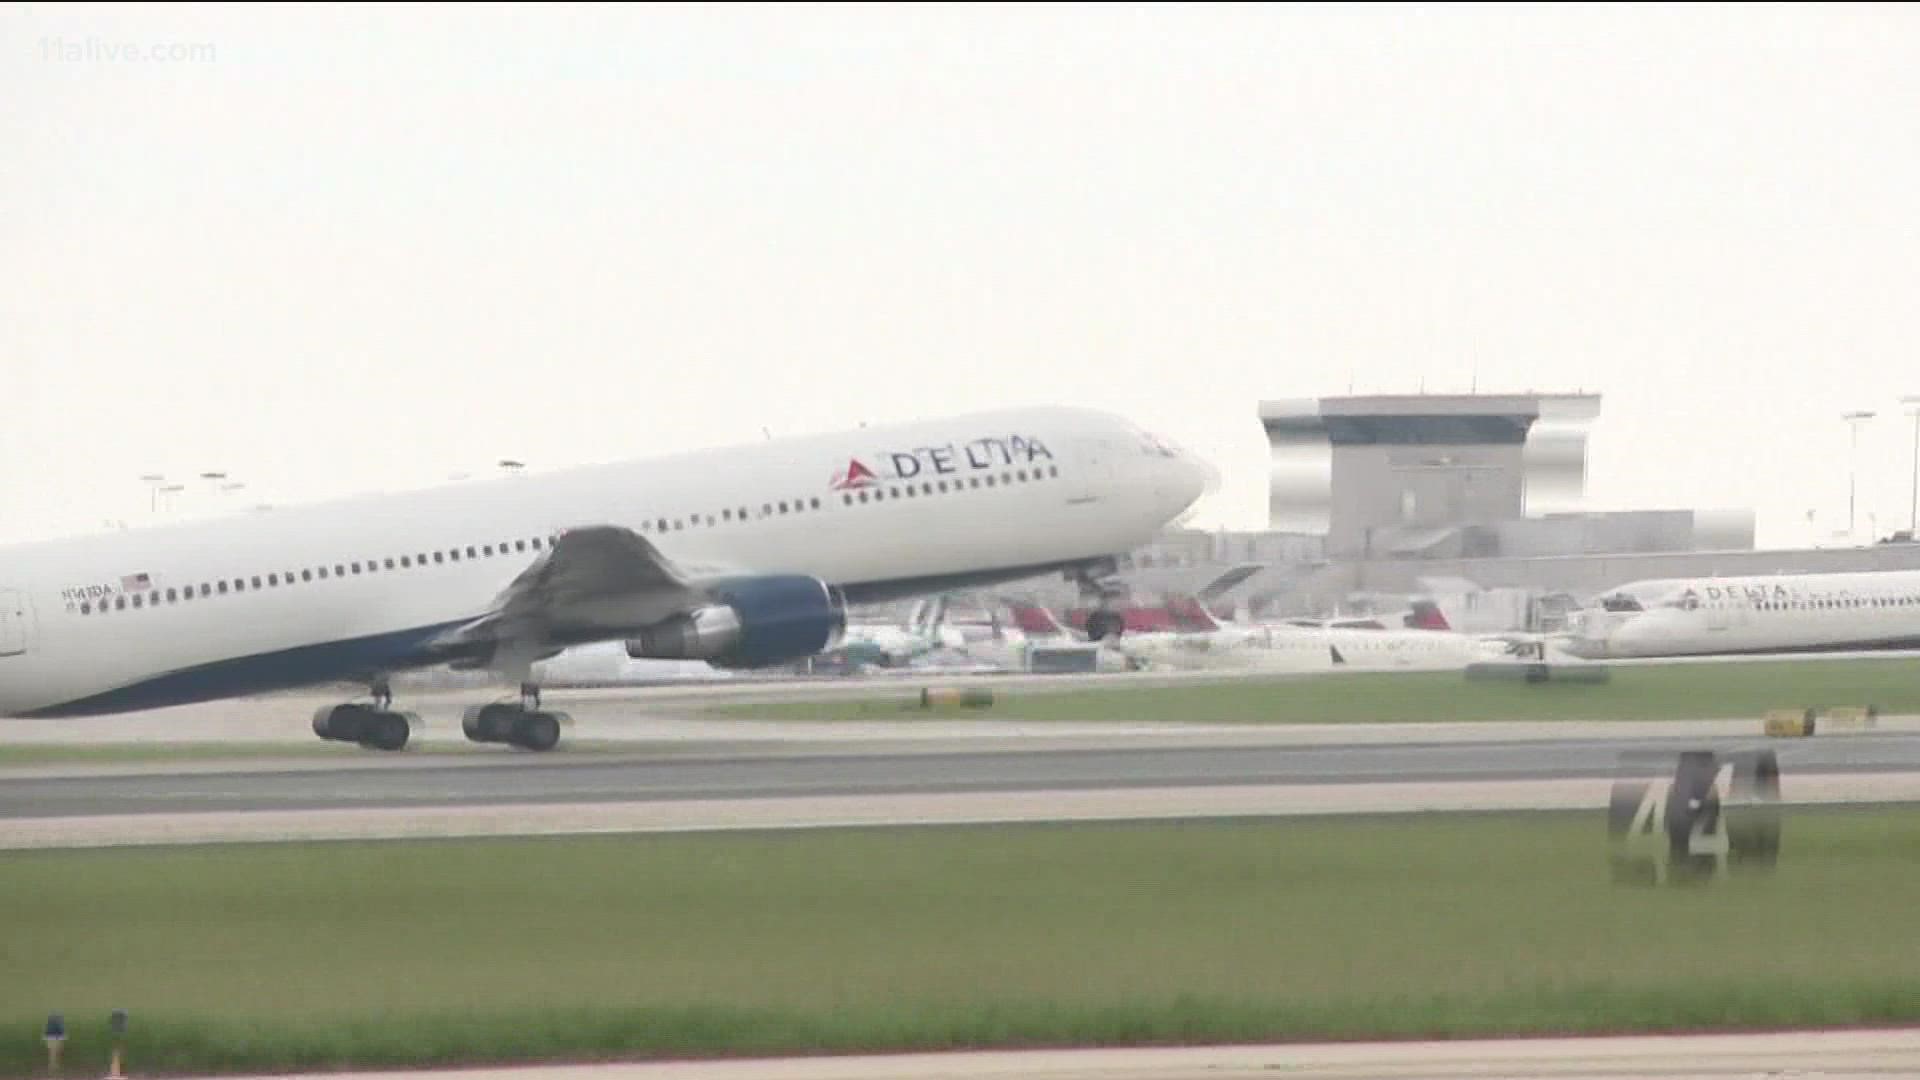 FAA said it will offer swift consequences to unruly passengers.